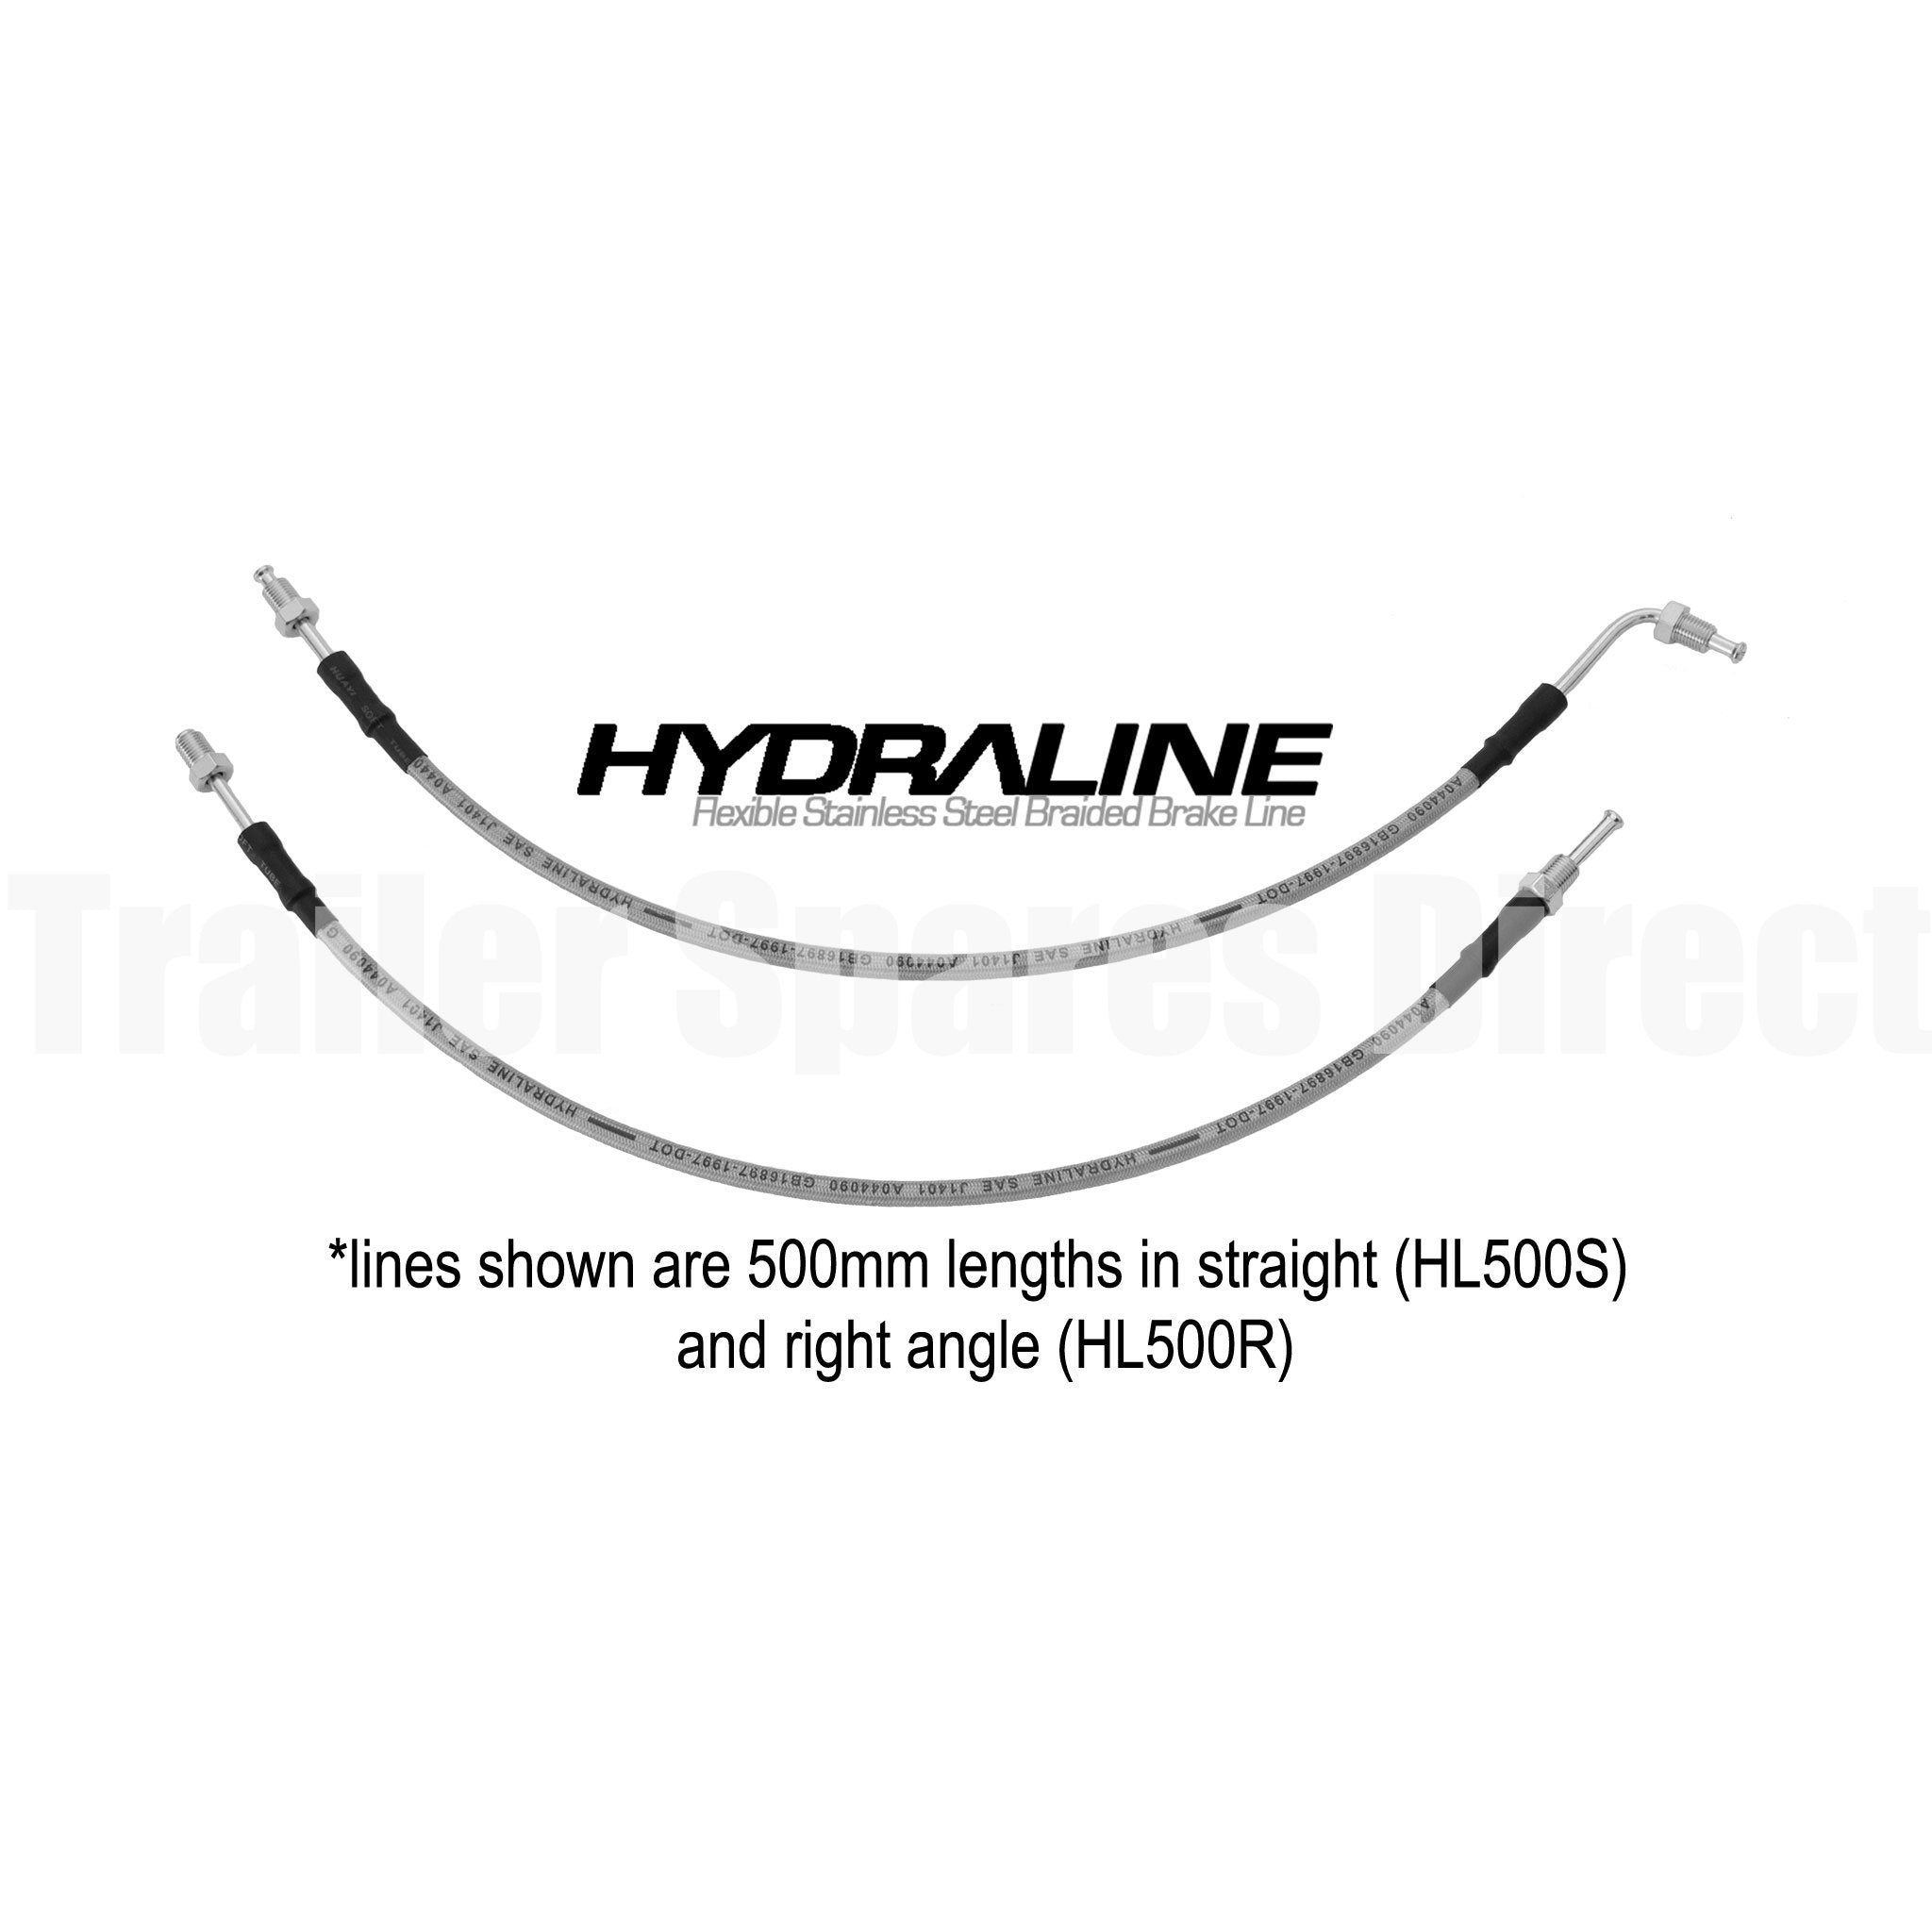 Single axle HydraLine kit with 2500mm lead line